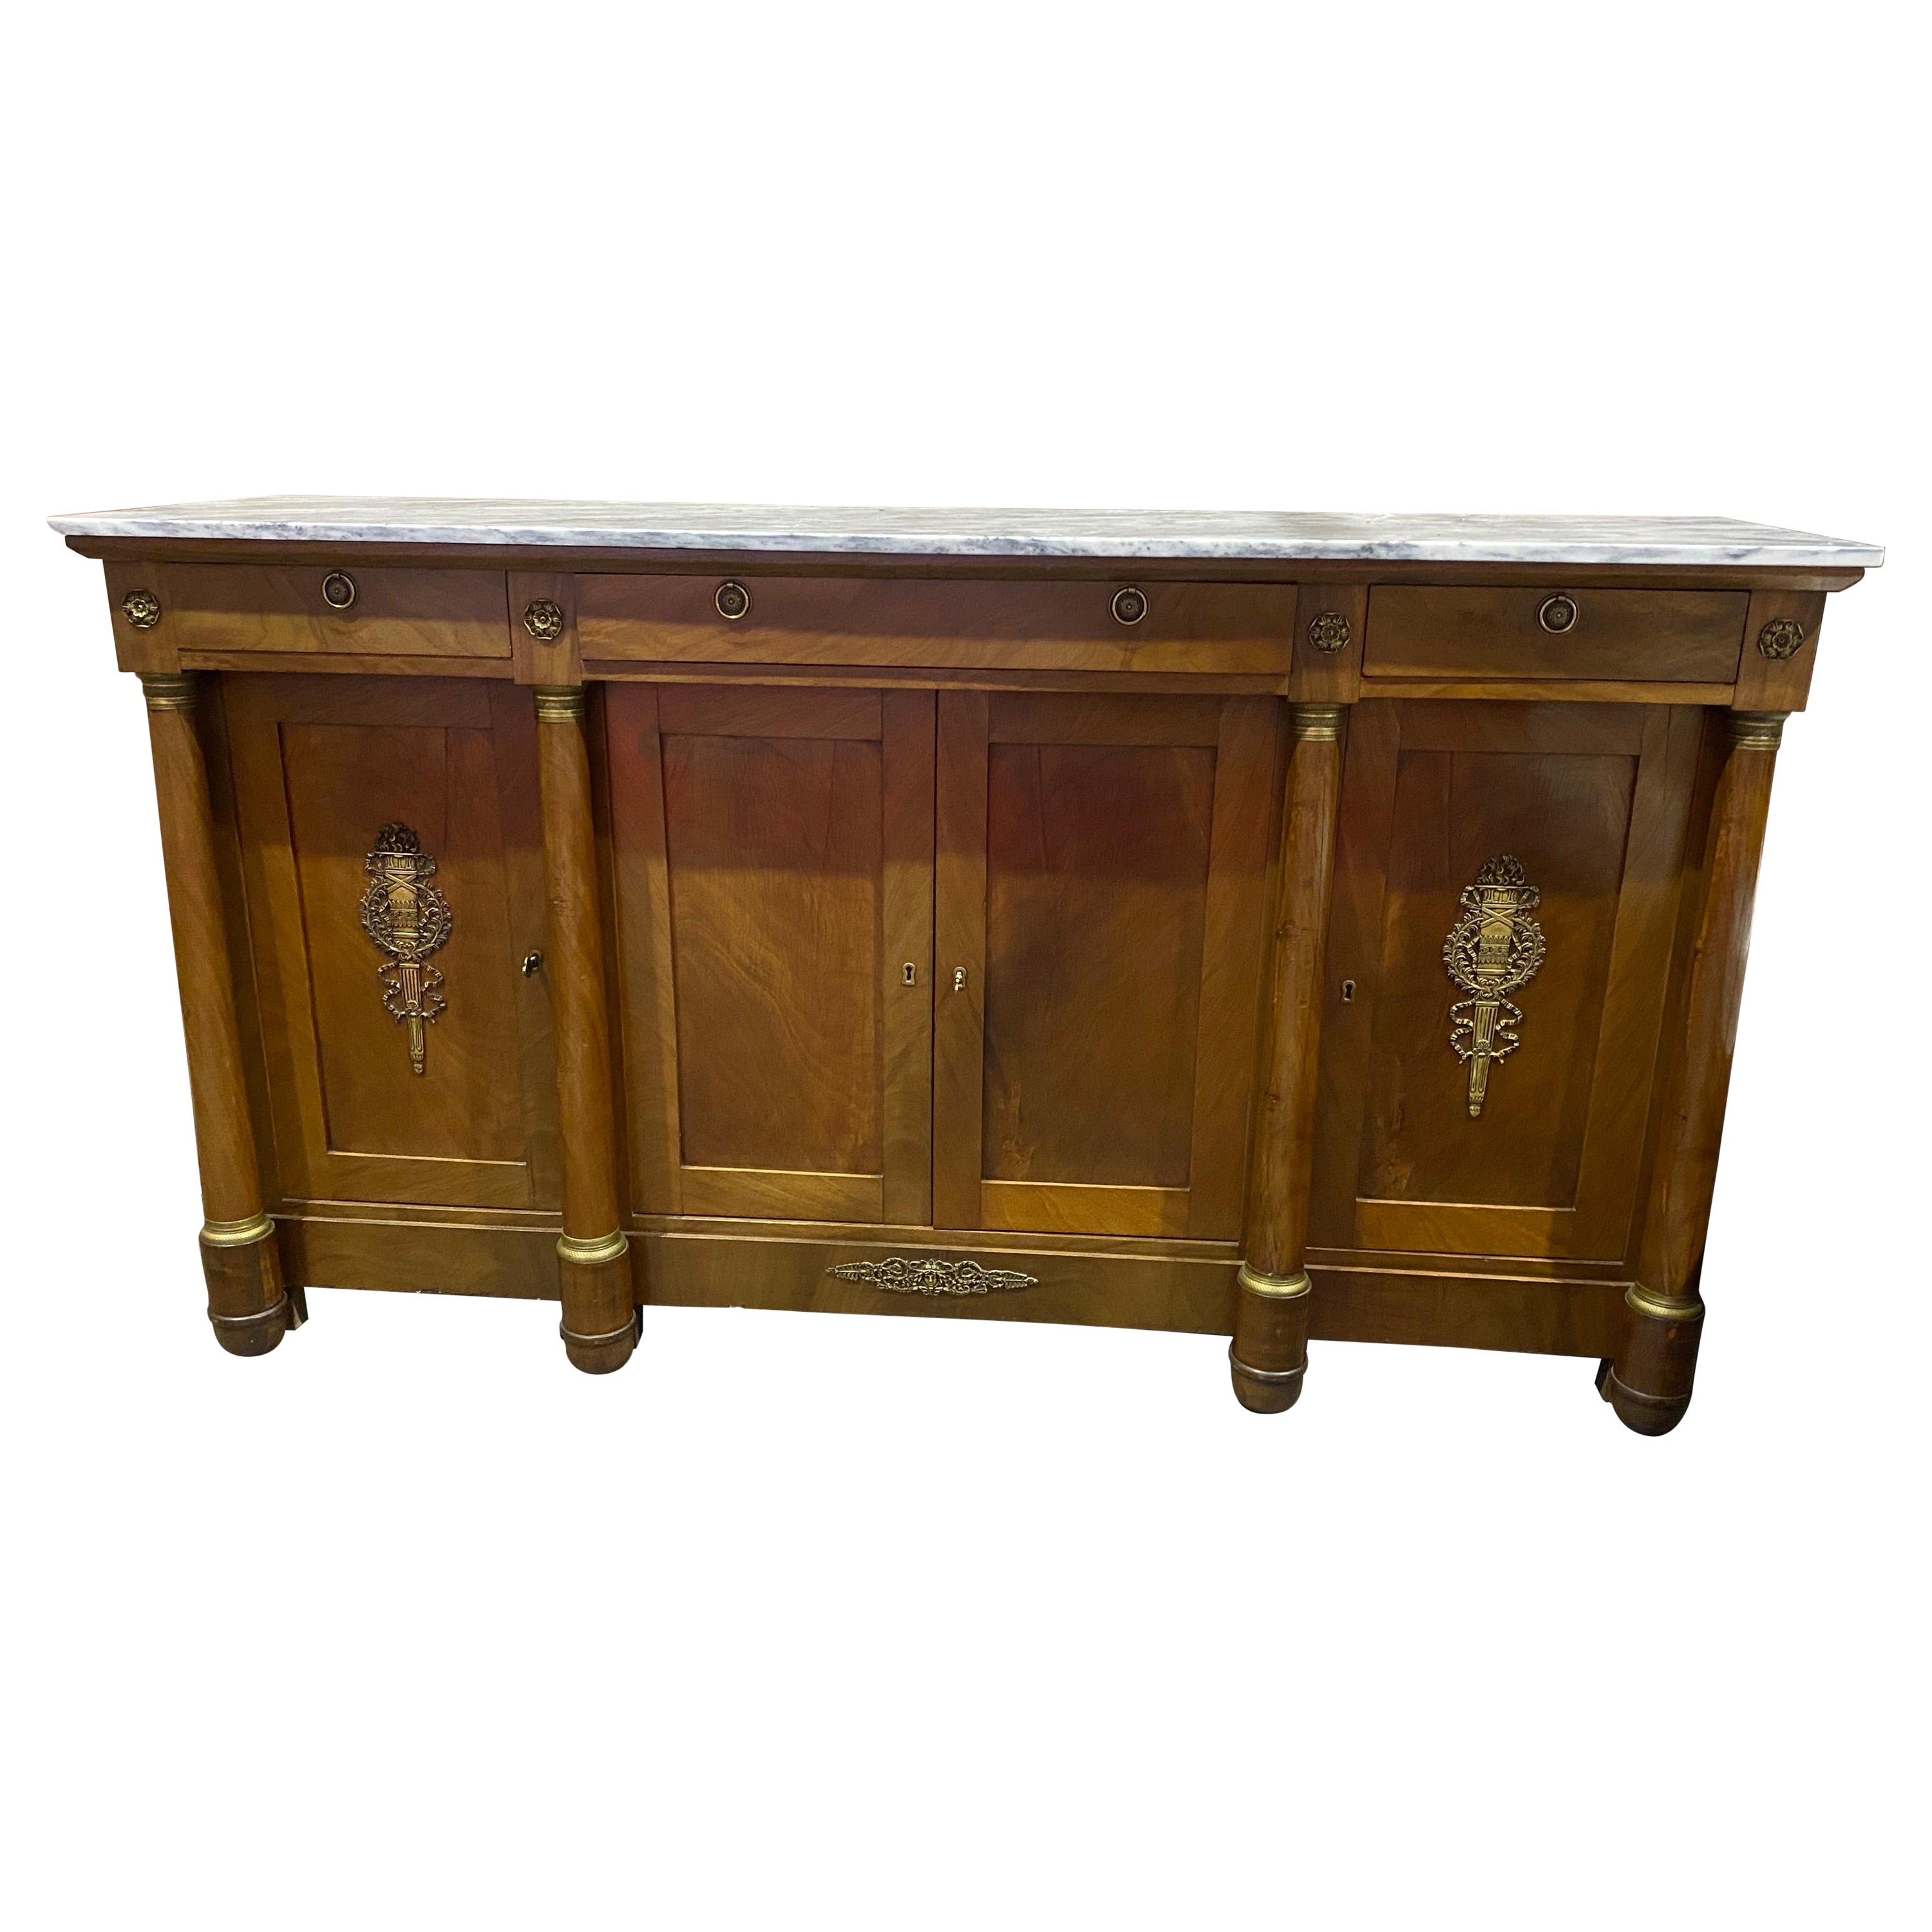 19th century French Empire Marble Top Enfilade For Sale